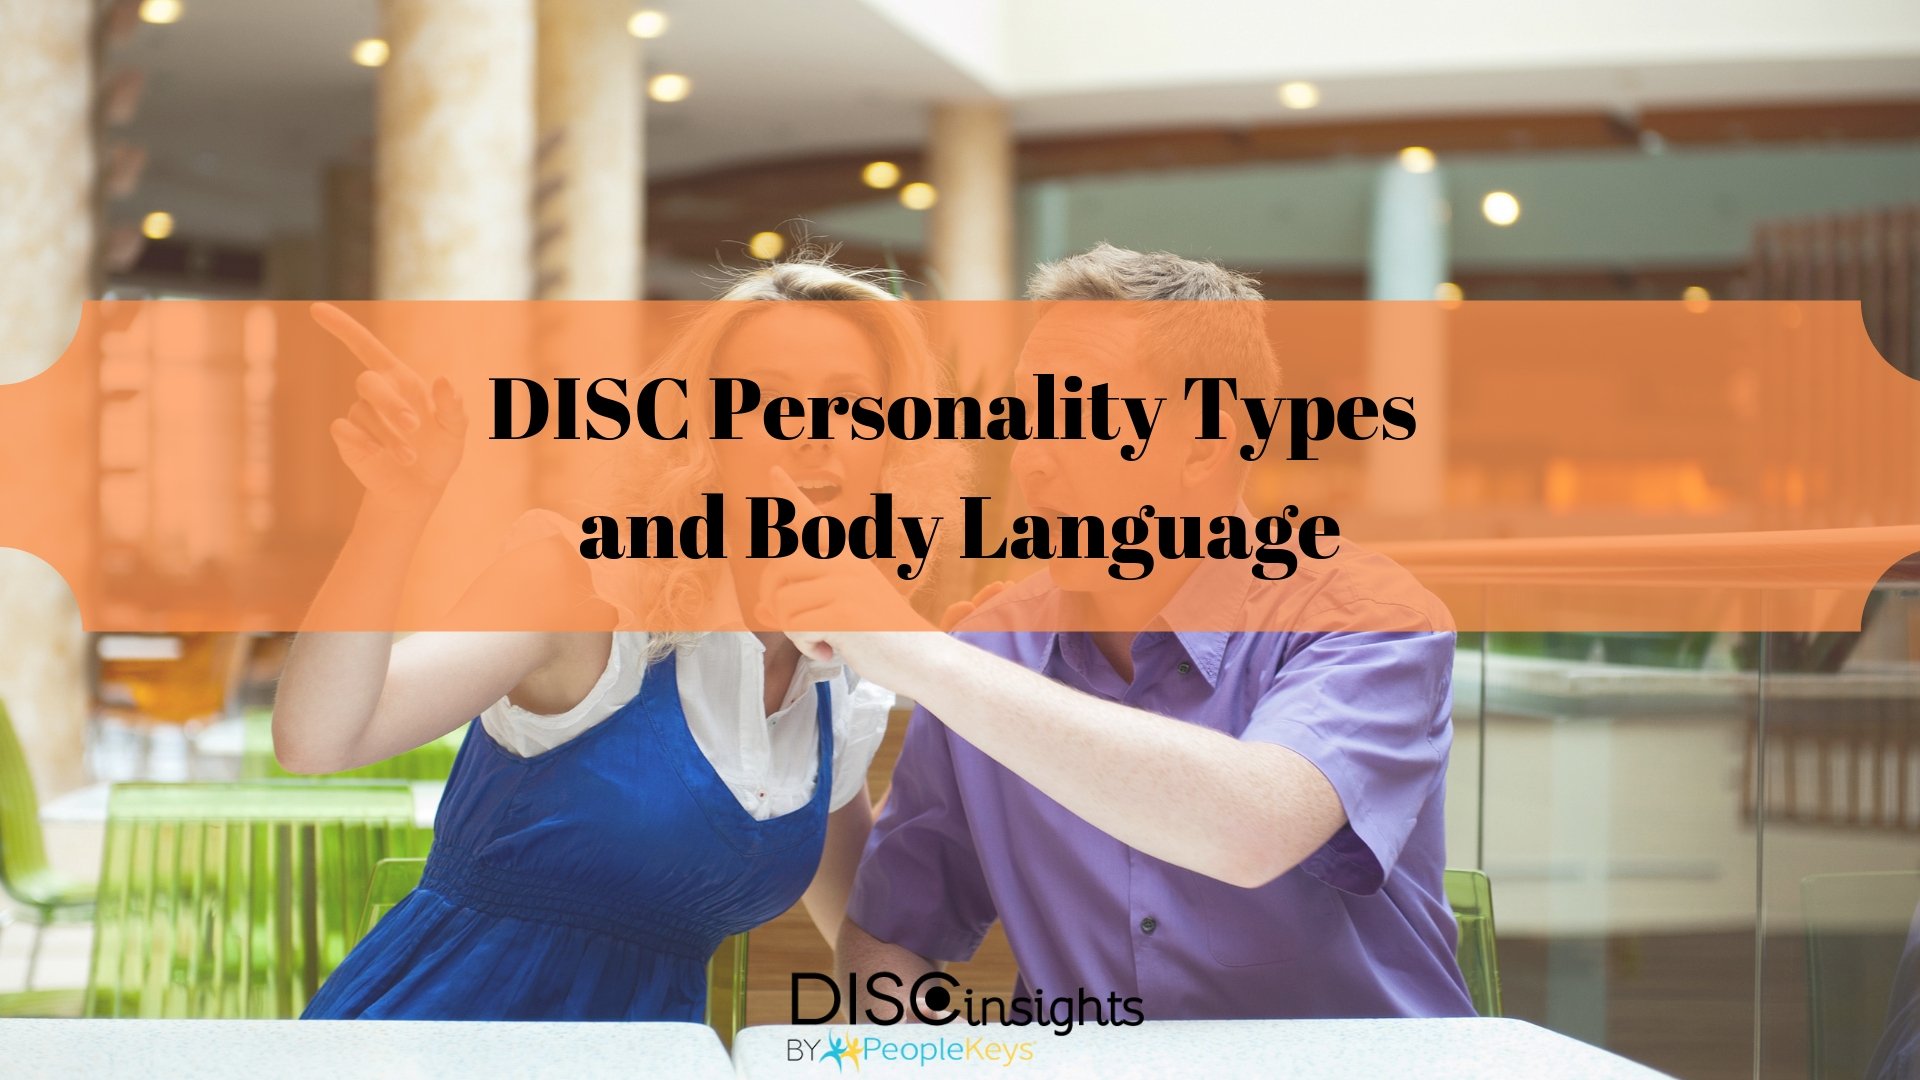 DISC Personality Types and Body Language